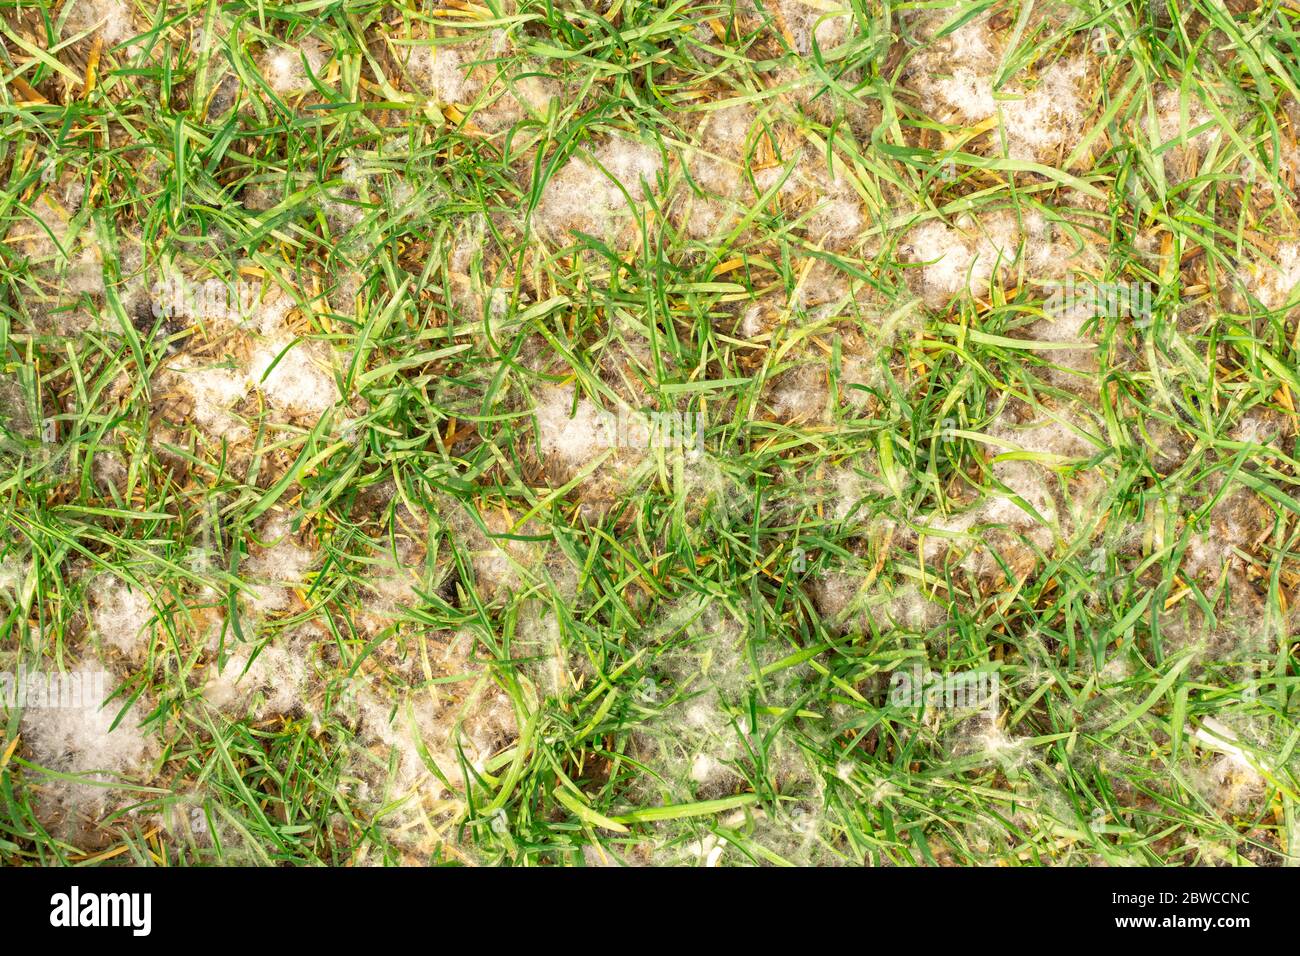 poplar fluff on green grass. fluffy and airy fluff of trees background Stock Photo